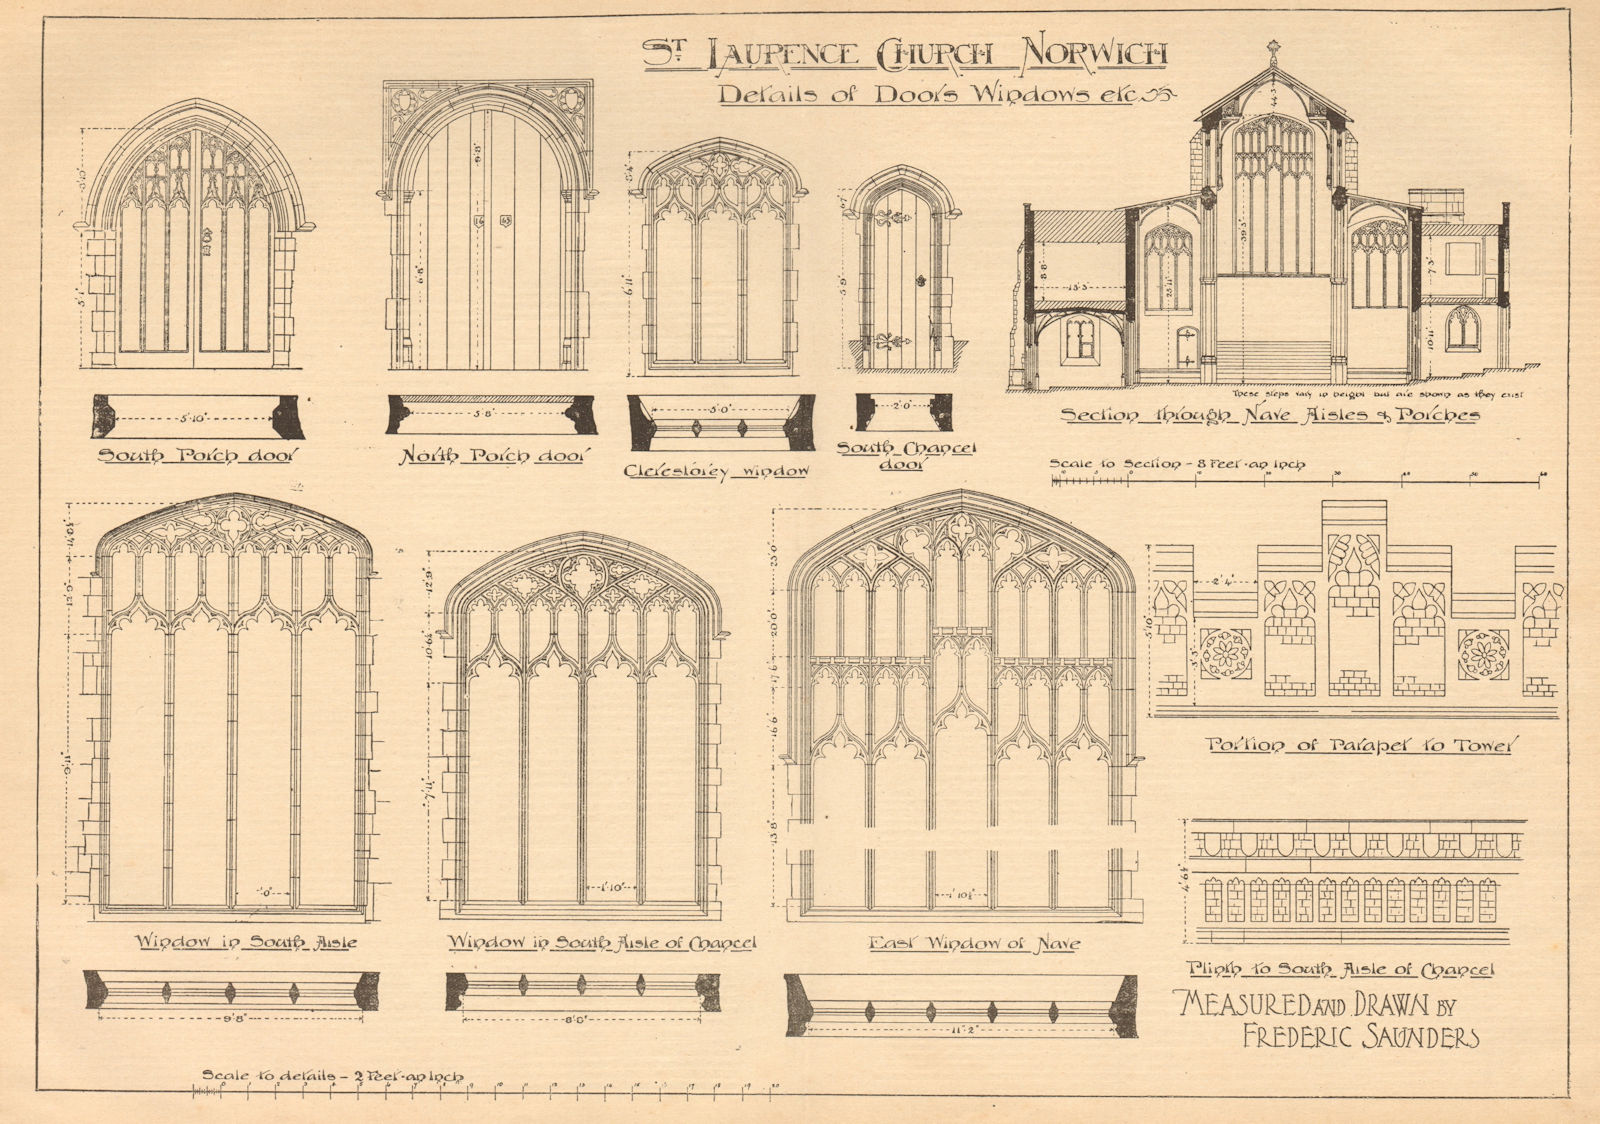 Associate Product St Laurence Church, Norwich by Frederic Saunders. Door nave aisle porch 1904